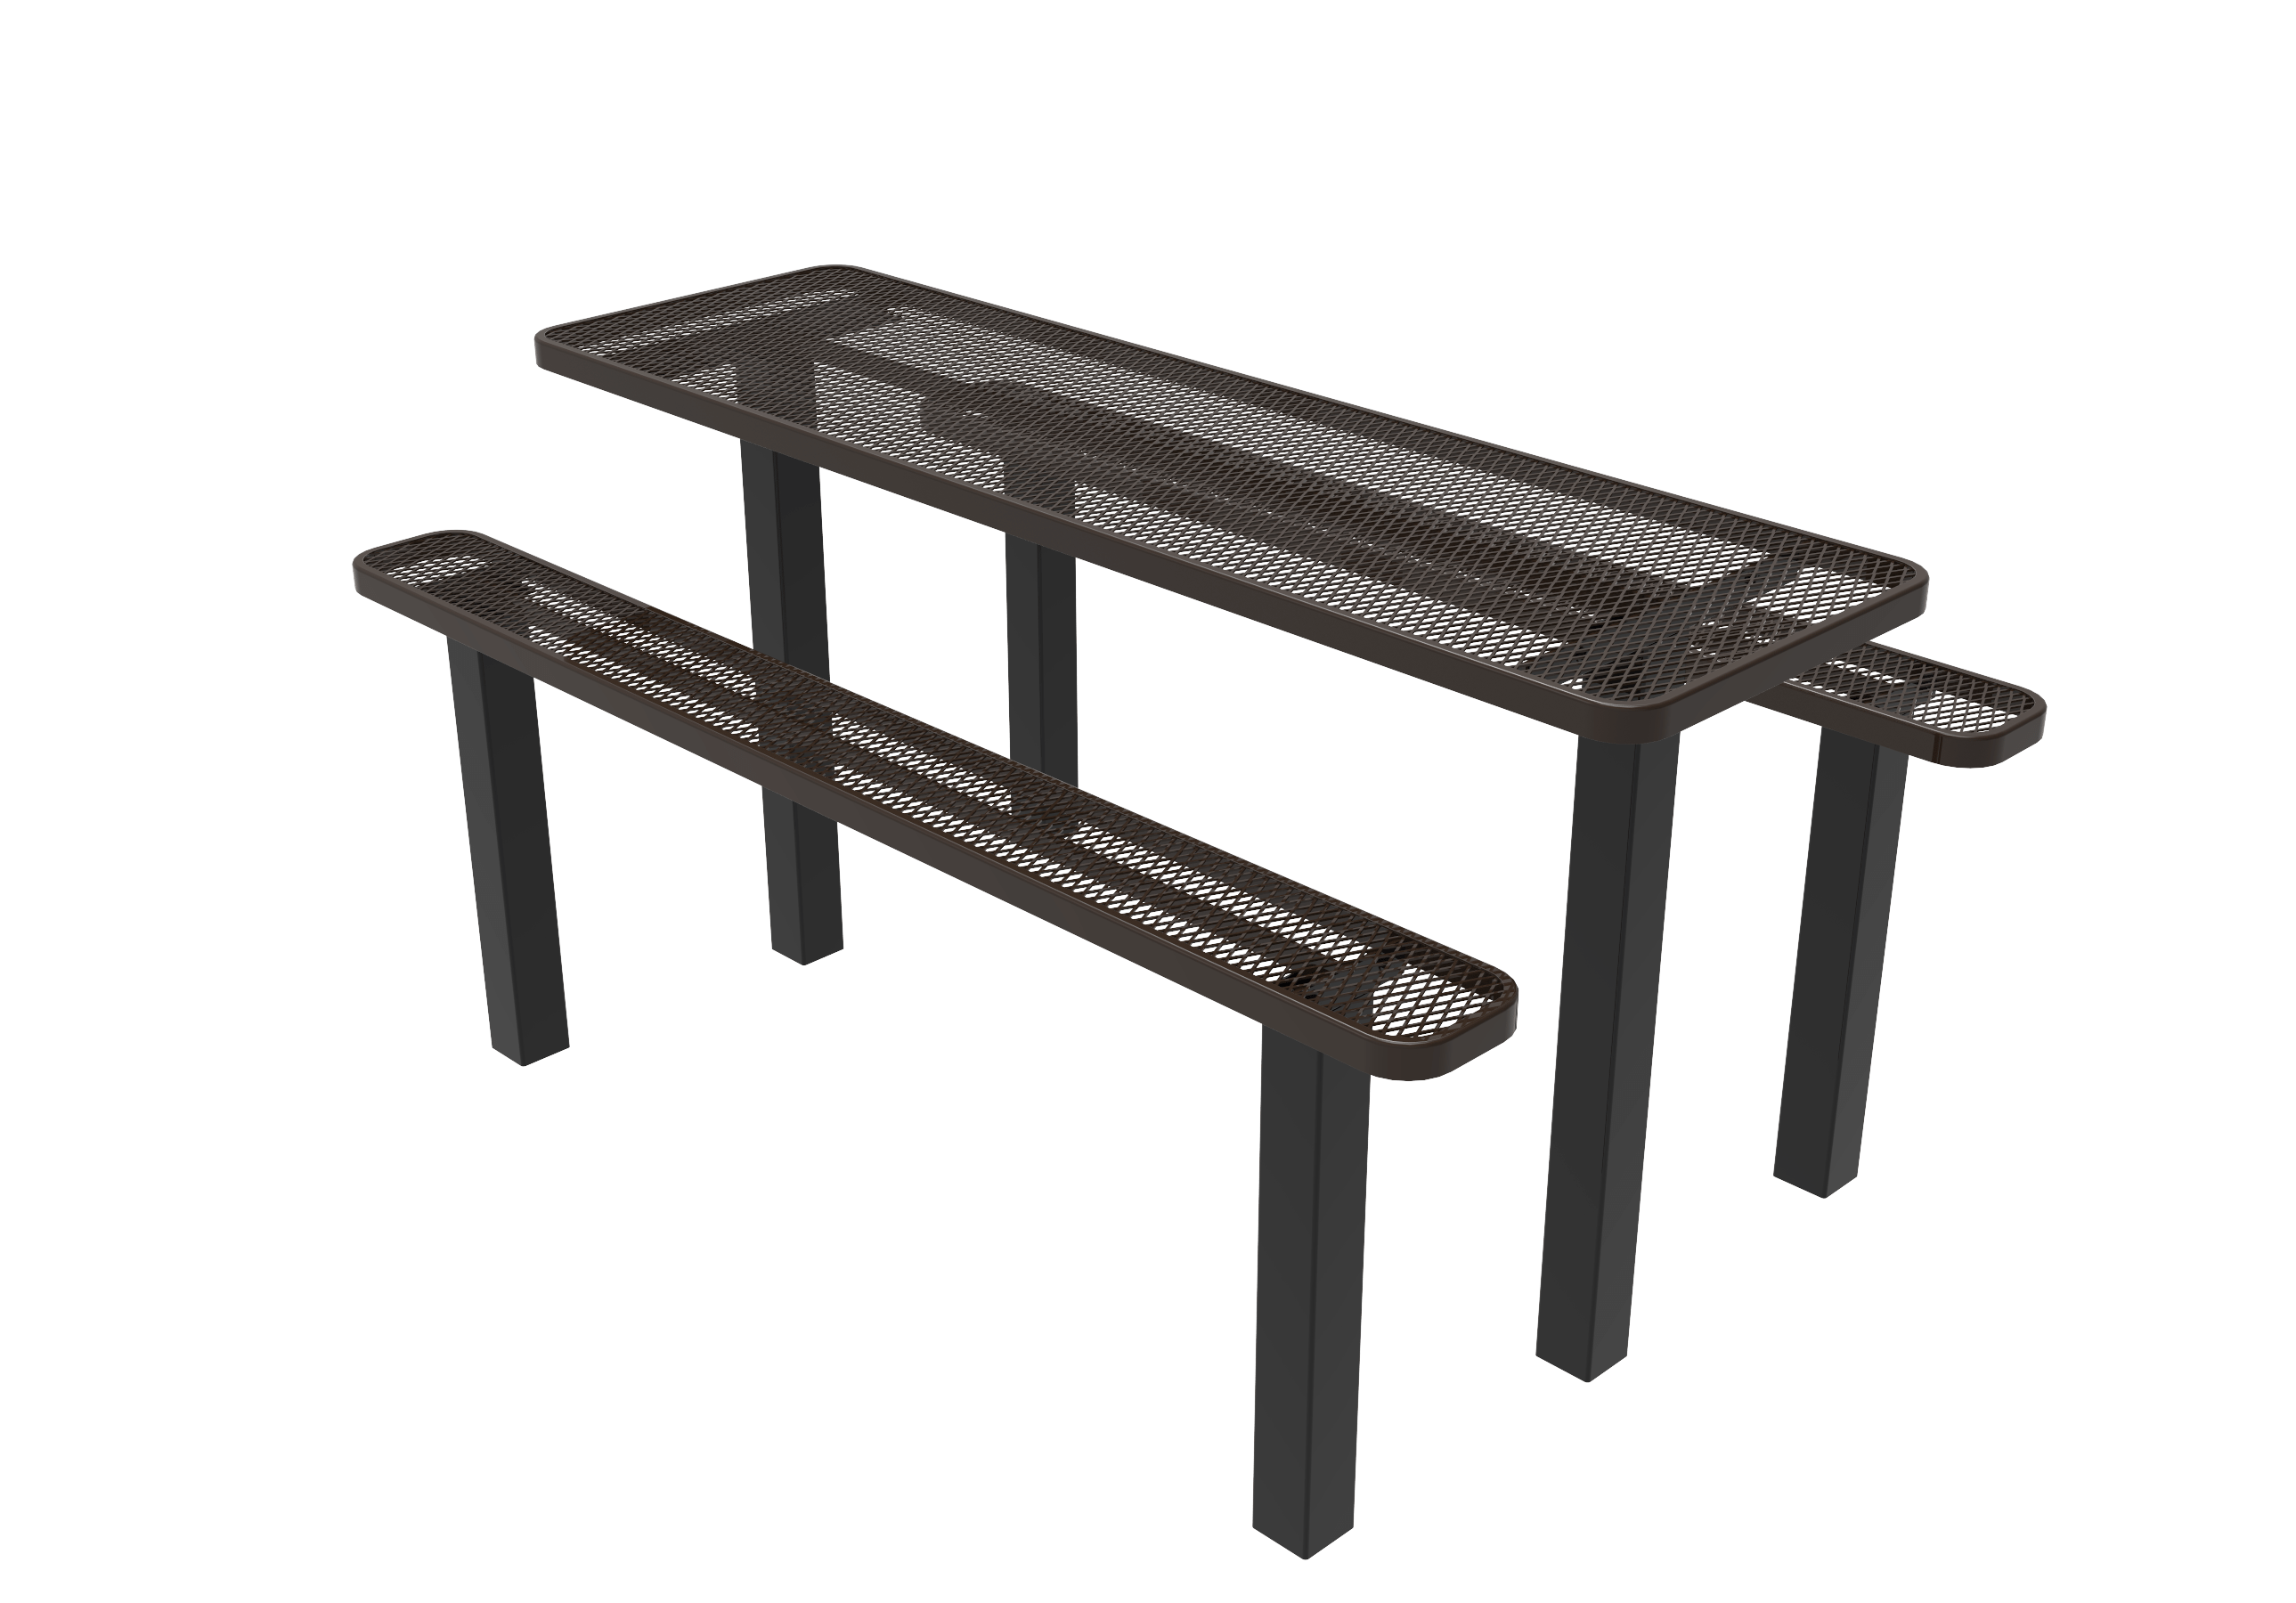 8′ Independent In Ground Table -Mesh
TRT08-C-10-000
Industry Standard Finish
$1299.00
TRT08-A-10-000
Advantage Premium Finish
$1649.00
